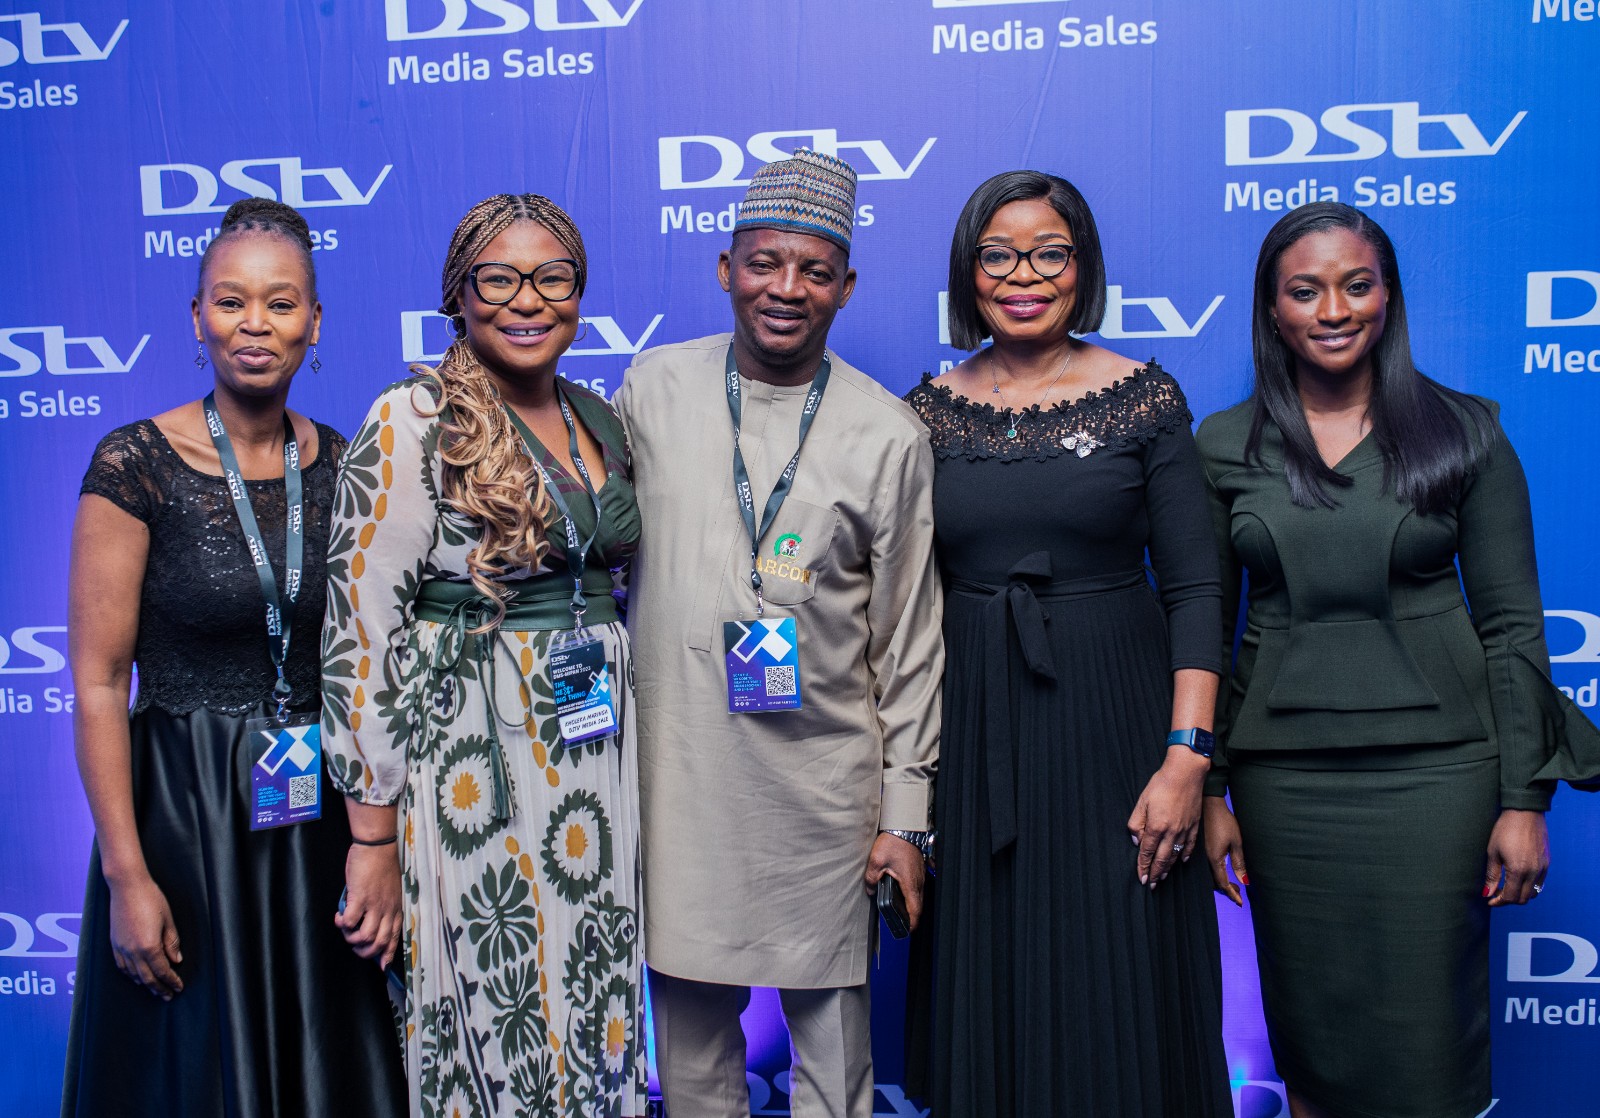 From Left: Executive Head Business Enablement, DStv Media Sales, Nosipho Mabuza; DStv Media Head of Sales, Africa, Kholeka Maringa; Director-General, Advertising Regulatory Council of Nigeria (ARCON), Dr. Olalekan Fadolapo; Executive Head, DStv Media Sales, Doris Ohanugo and Executive Head of Content and West Africa Channels, MultiChoice Nigeria, Dr. Busola Tejumola, at the workshop